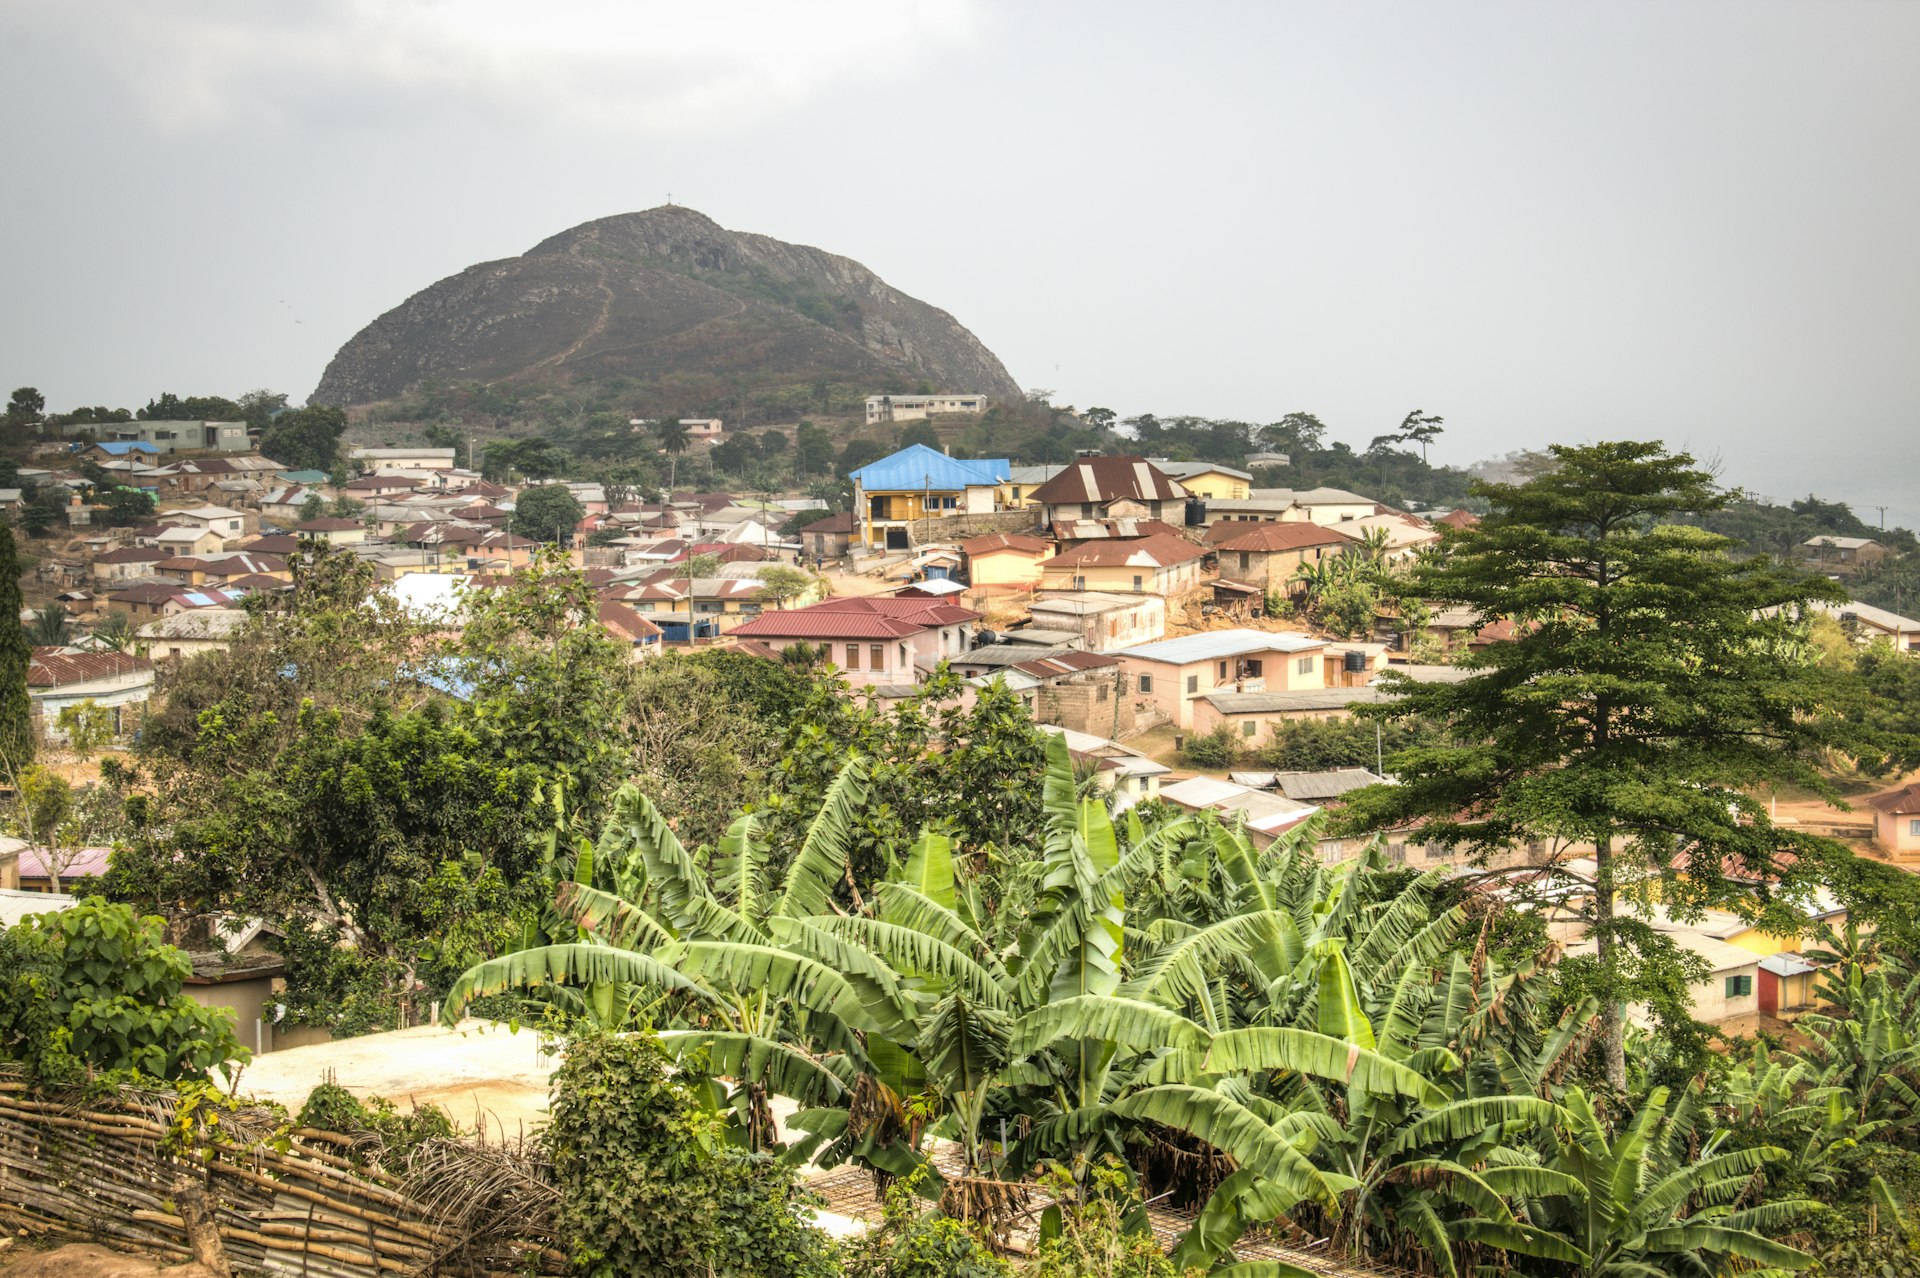 A view over the town of Amedzofe with Mount Gemi in the distance, Volta Region, Ghana, West Africa